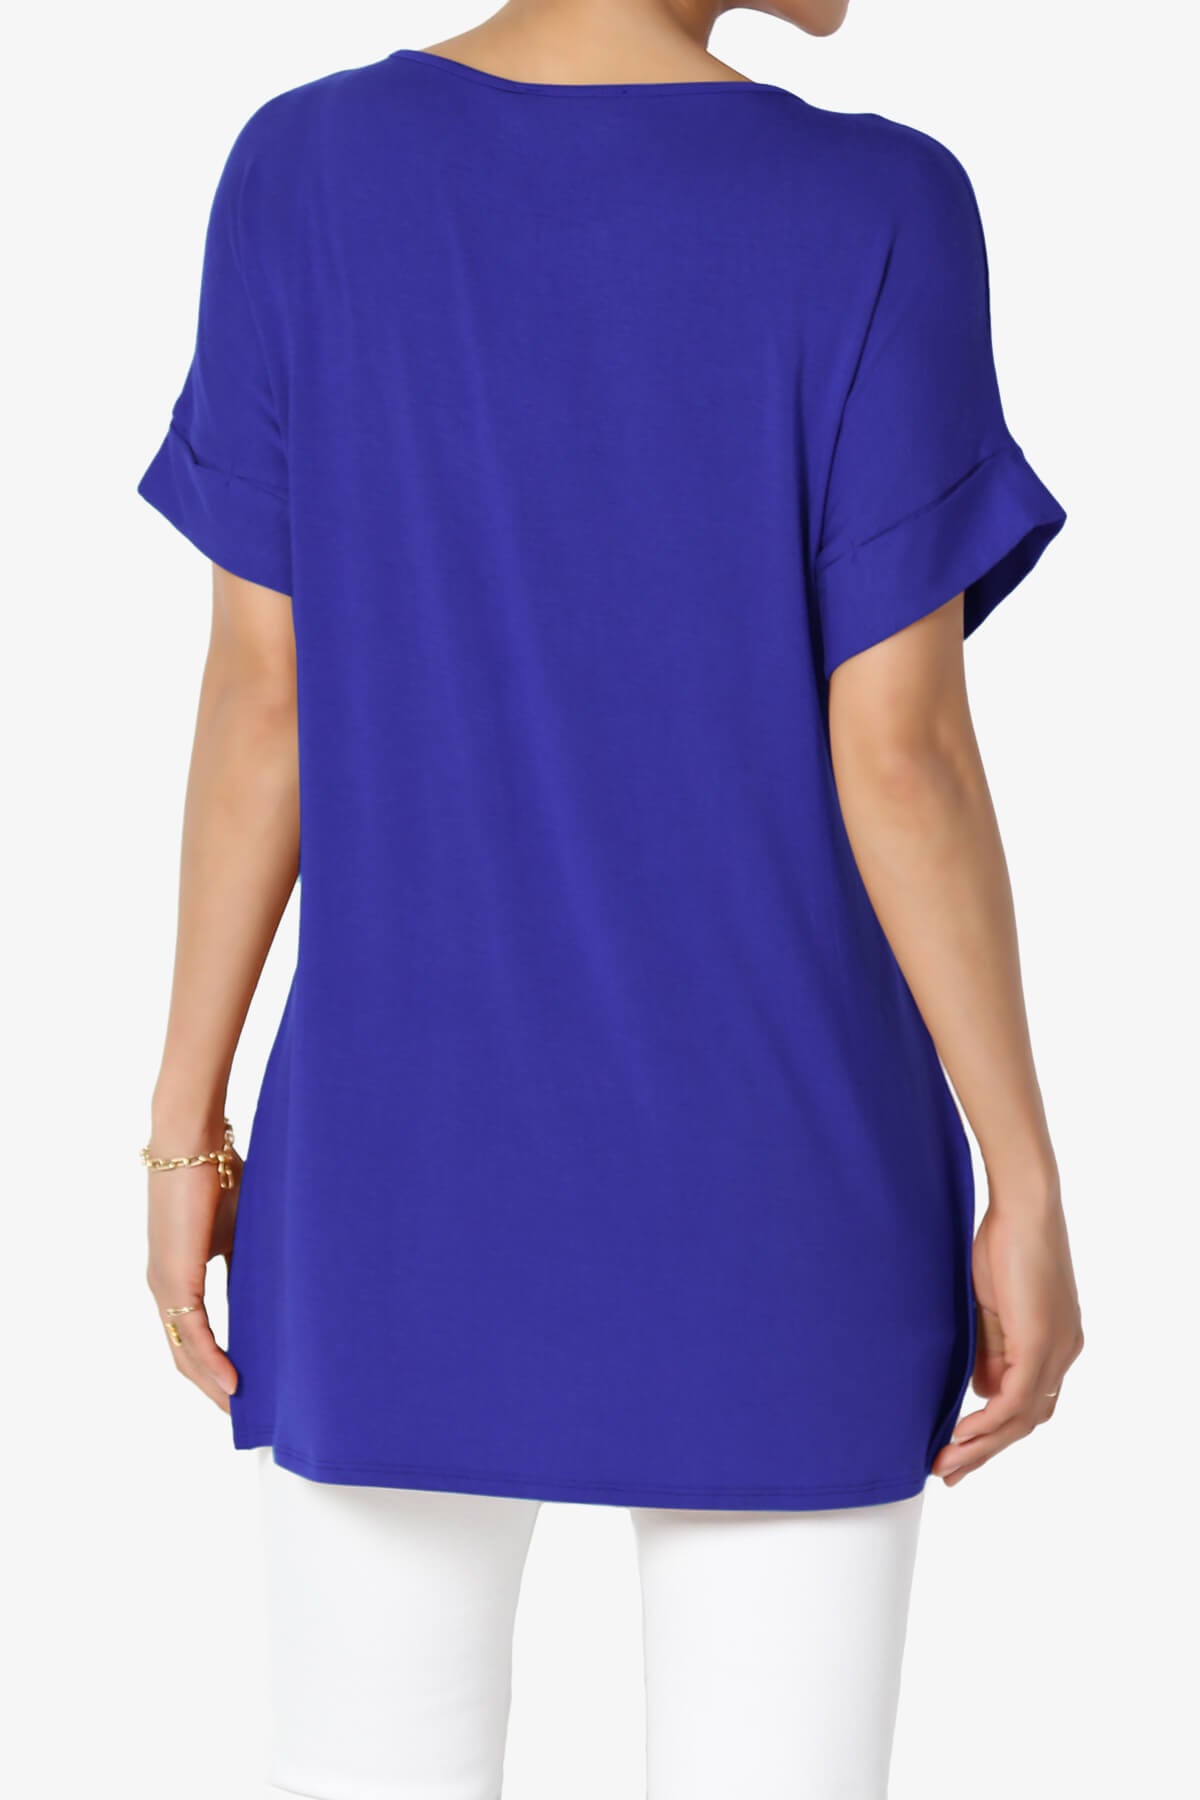 Load image into Gallery viewer, Poloma Modal Jersey Boat Neck Top BRIGHT BLUE_2
